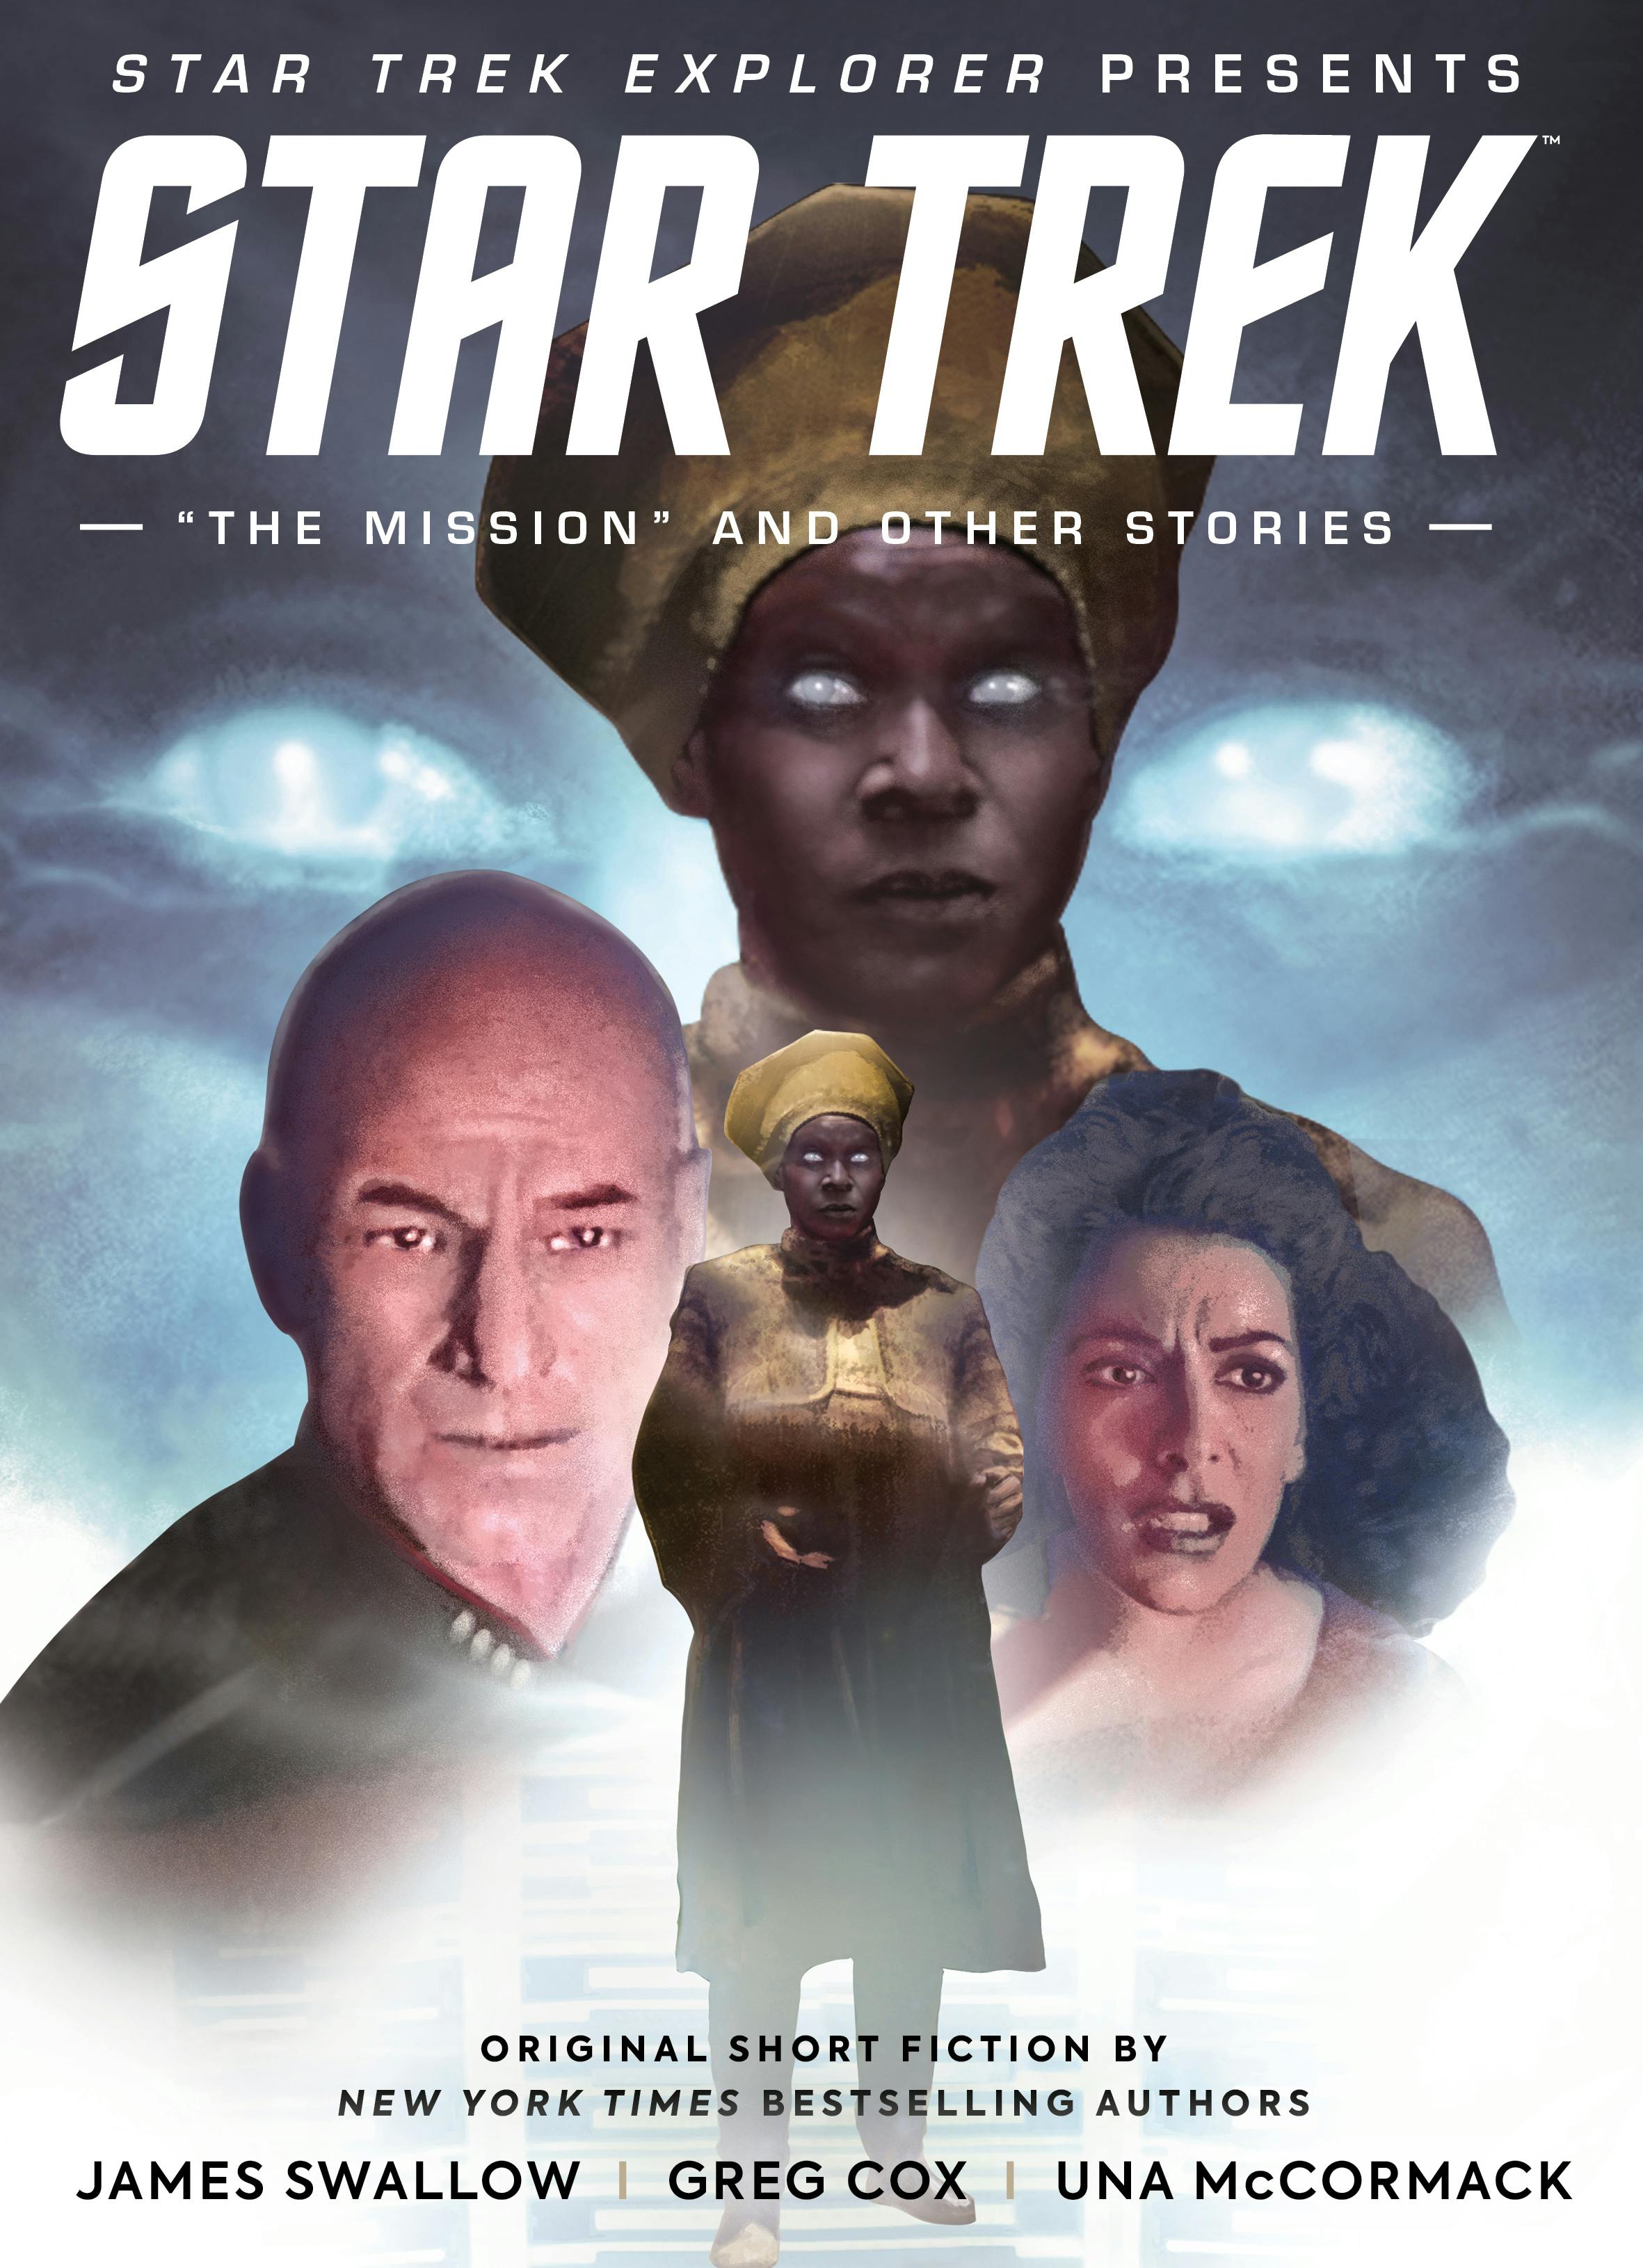 Star Trek Explorer Presents 'The Mission' and Other Stories cover featuring Jean-Luc Picard, Guinan, and Deanna Troi